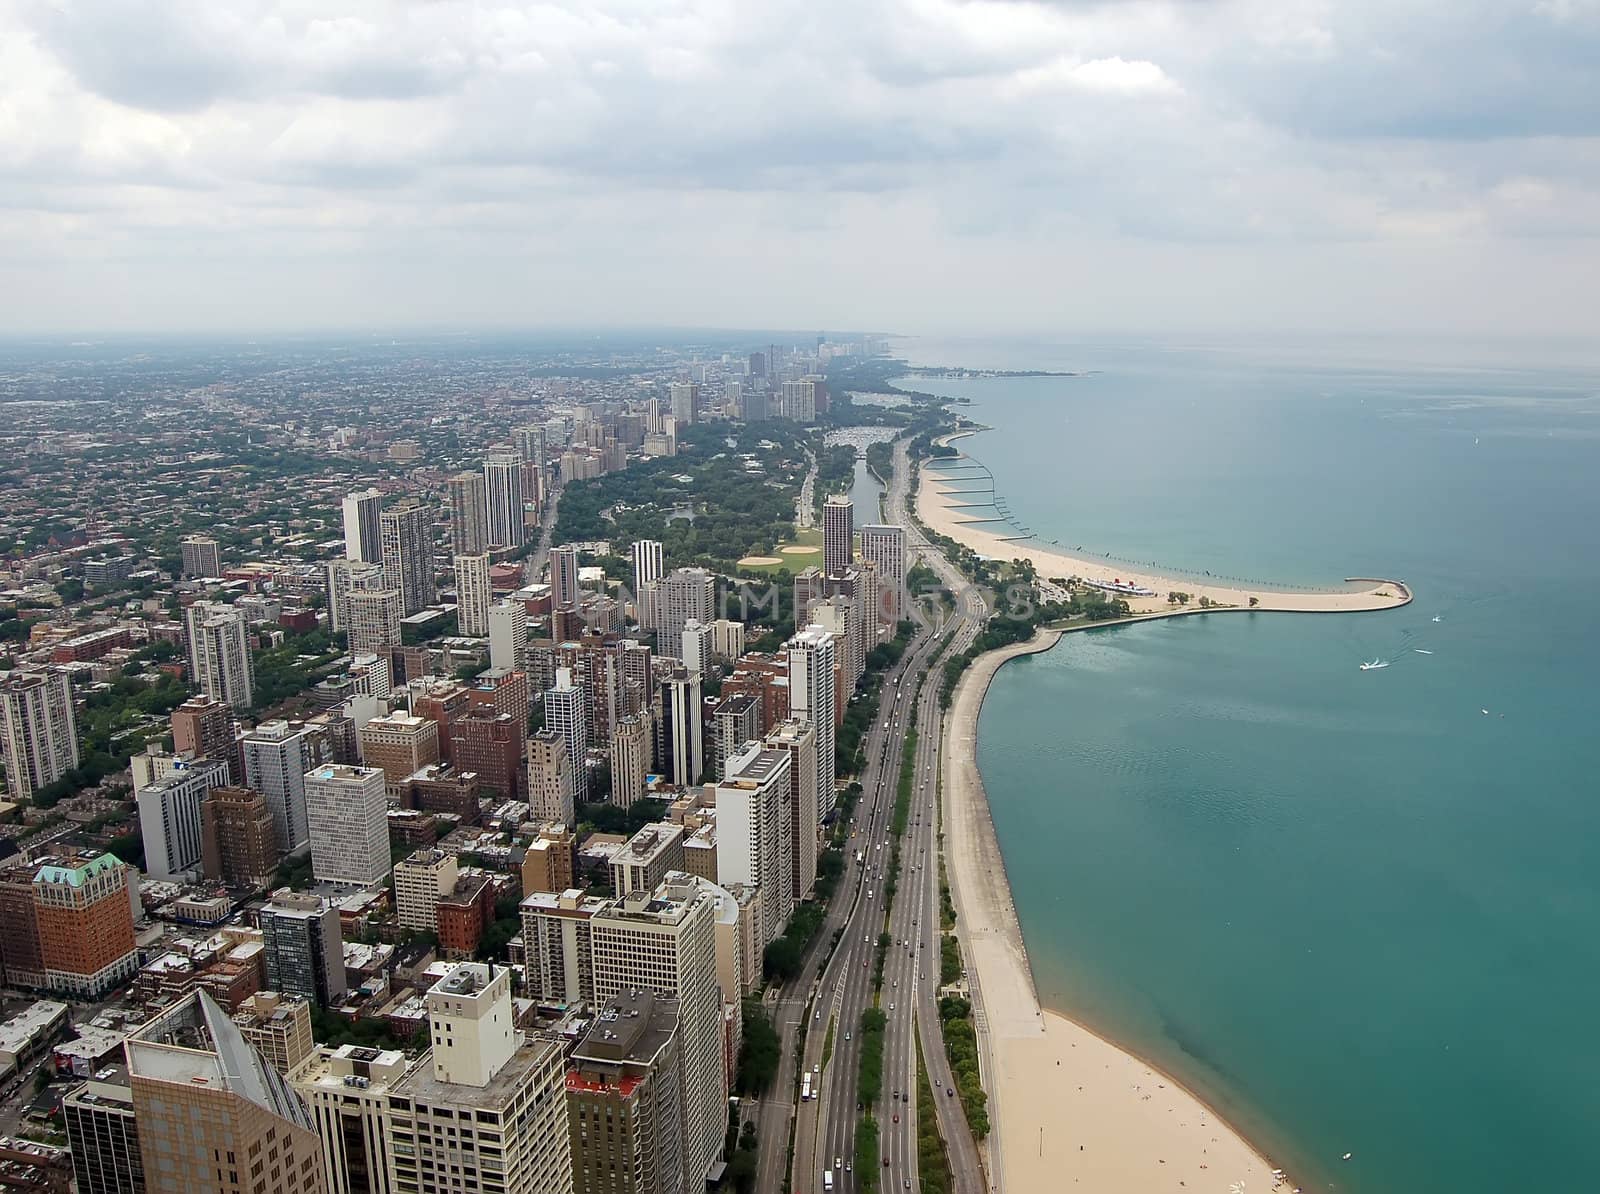 A view, looking north, of Chicago from a skyscraper